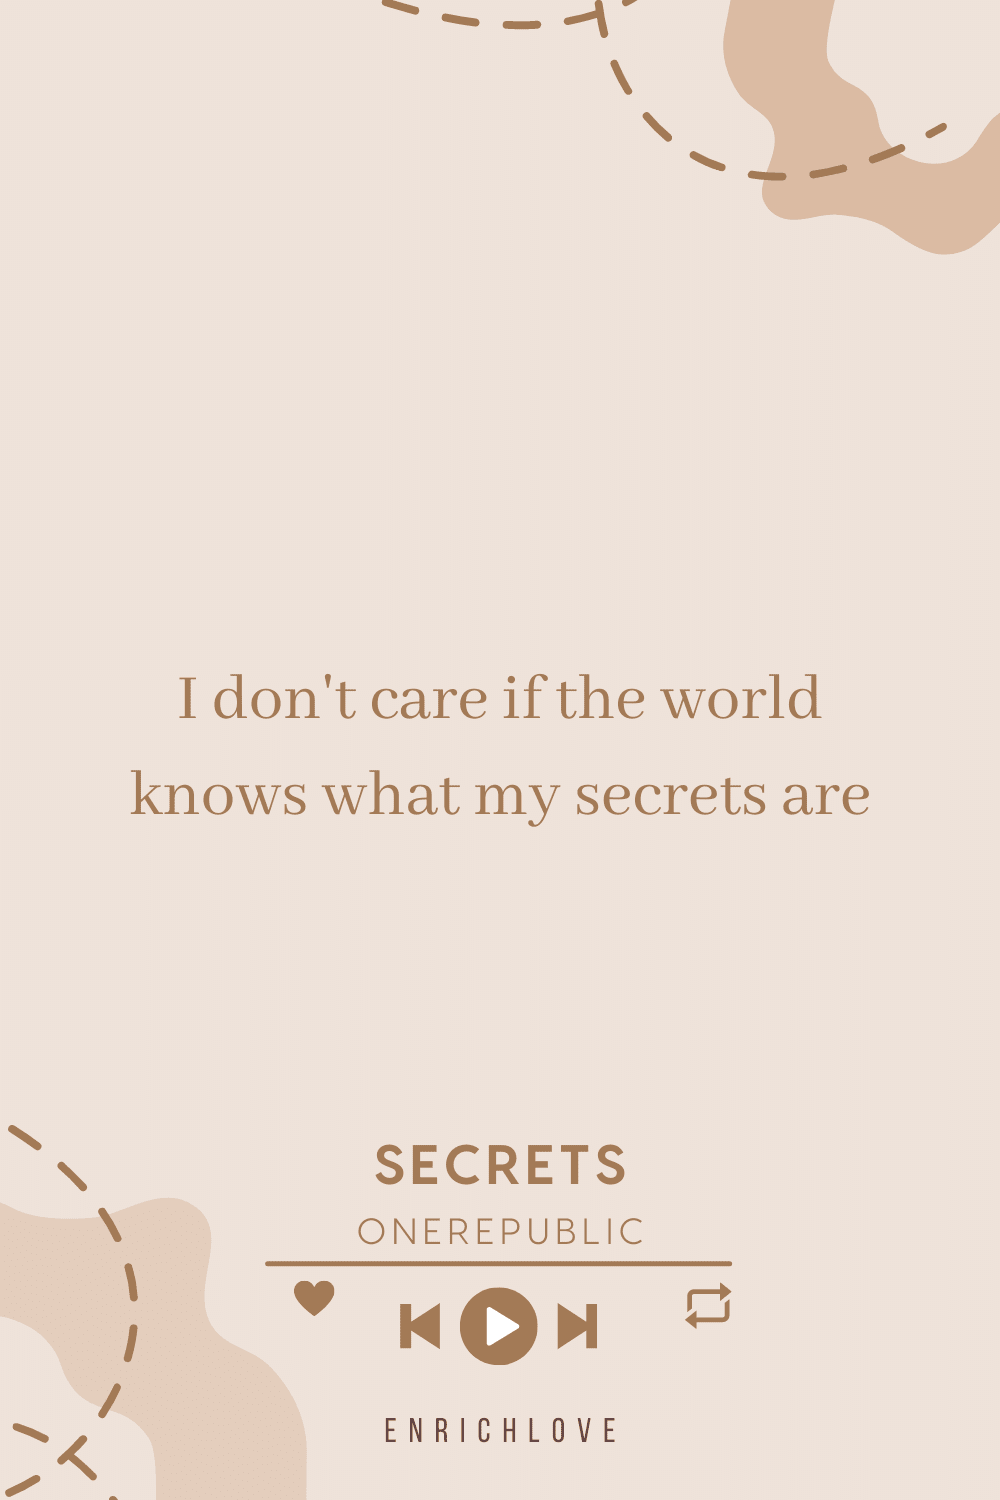 I don't care if the world knows what my secrets are